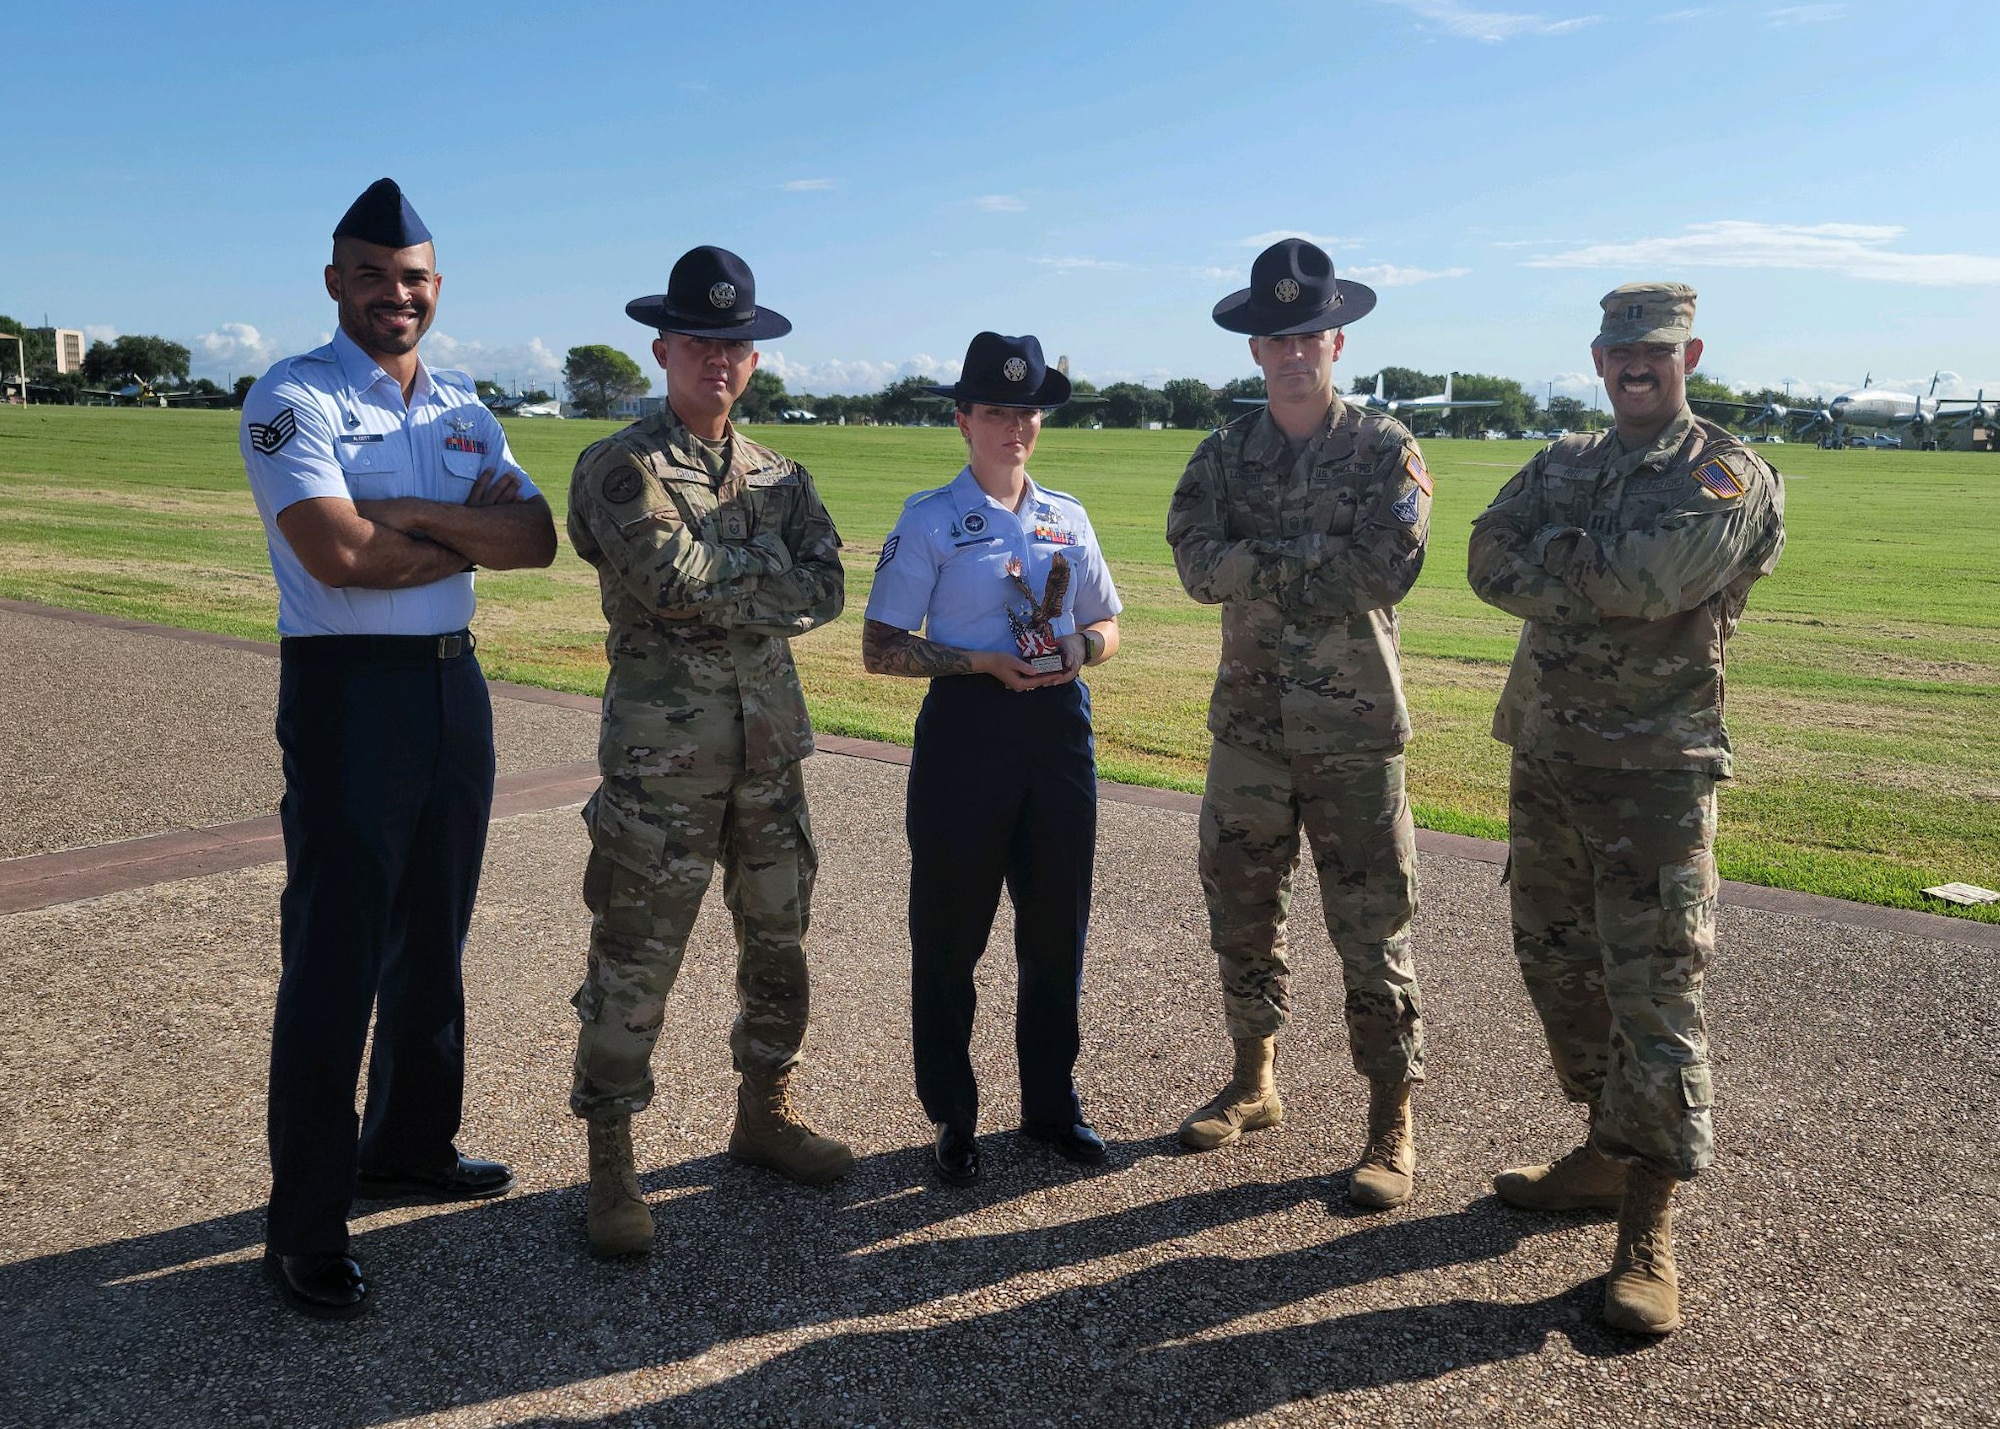 Sgt. Michelle Holt, center, poses for a photo with two fellow U.S. Space Force military training instructors on August 6, 2020, at Lackland Air Force Base, Texas.